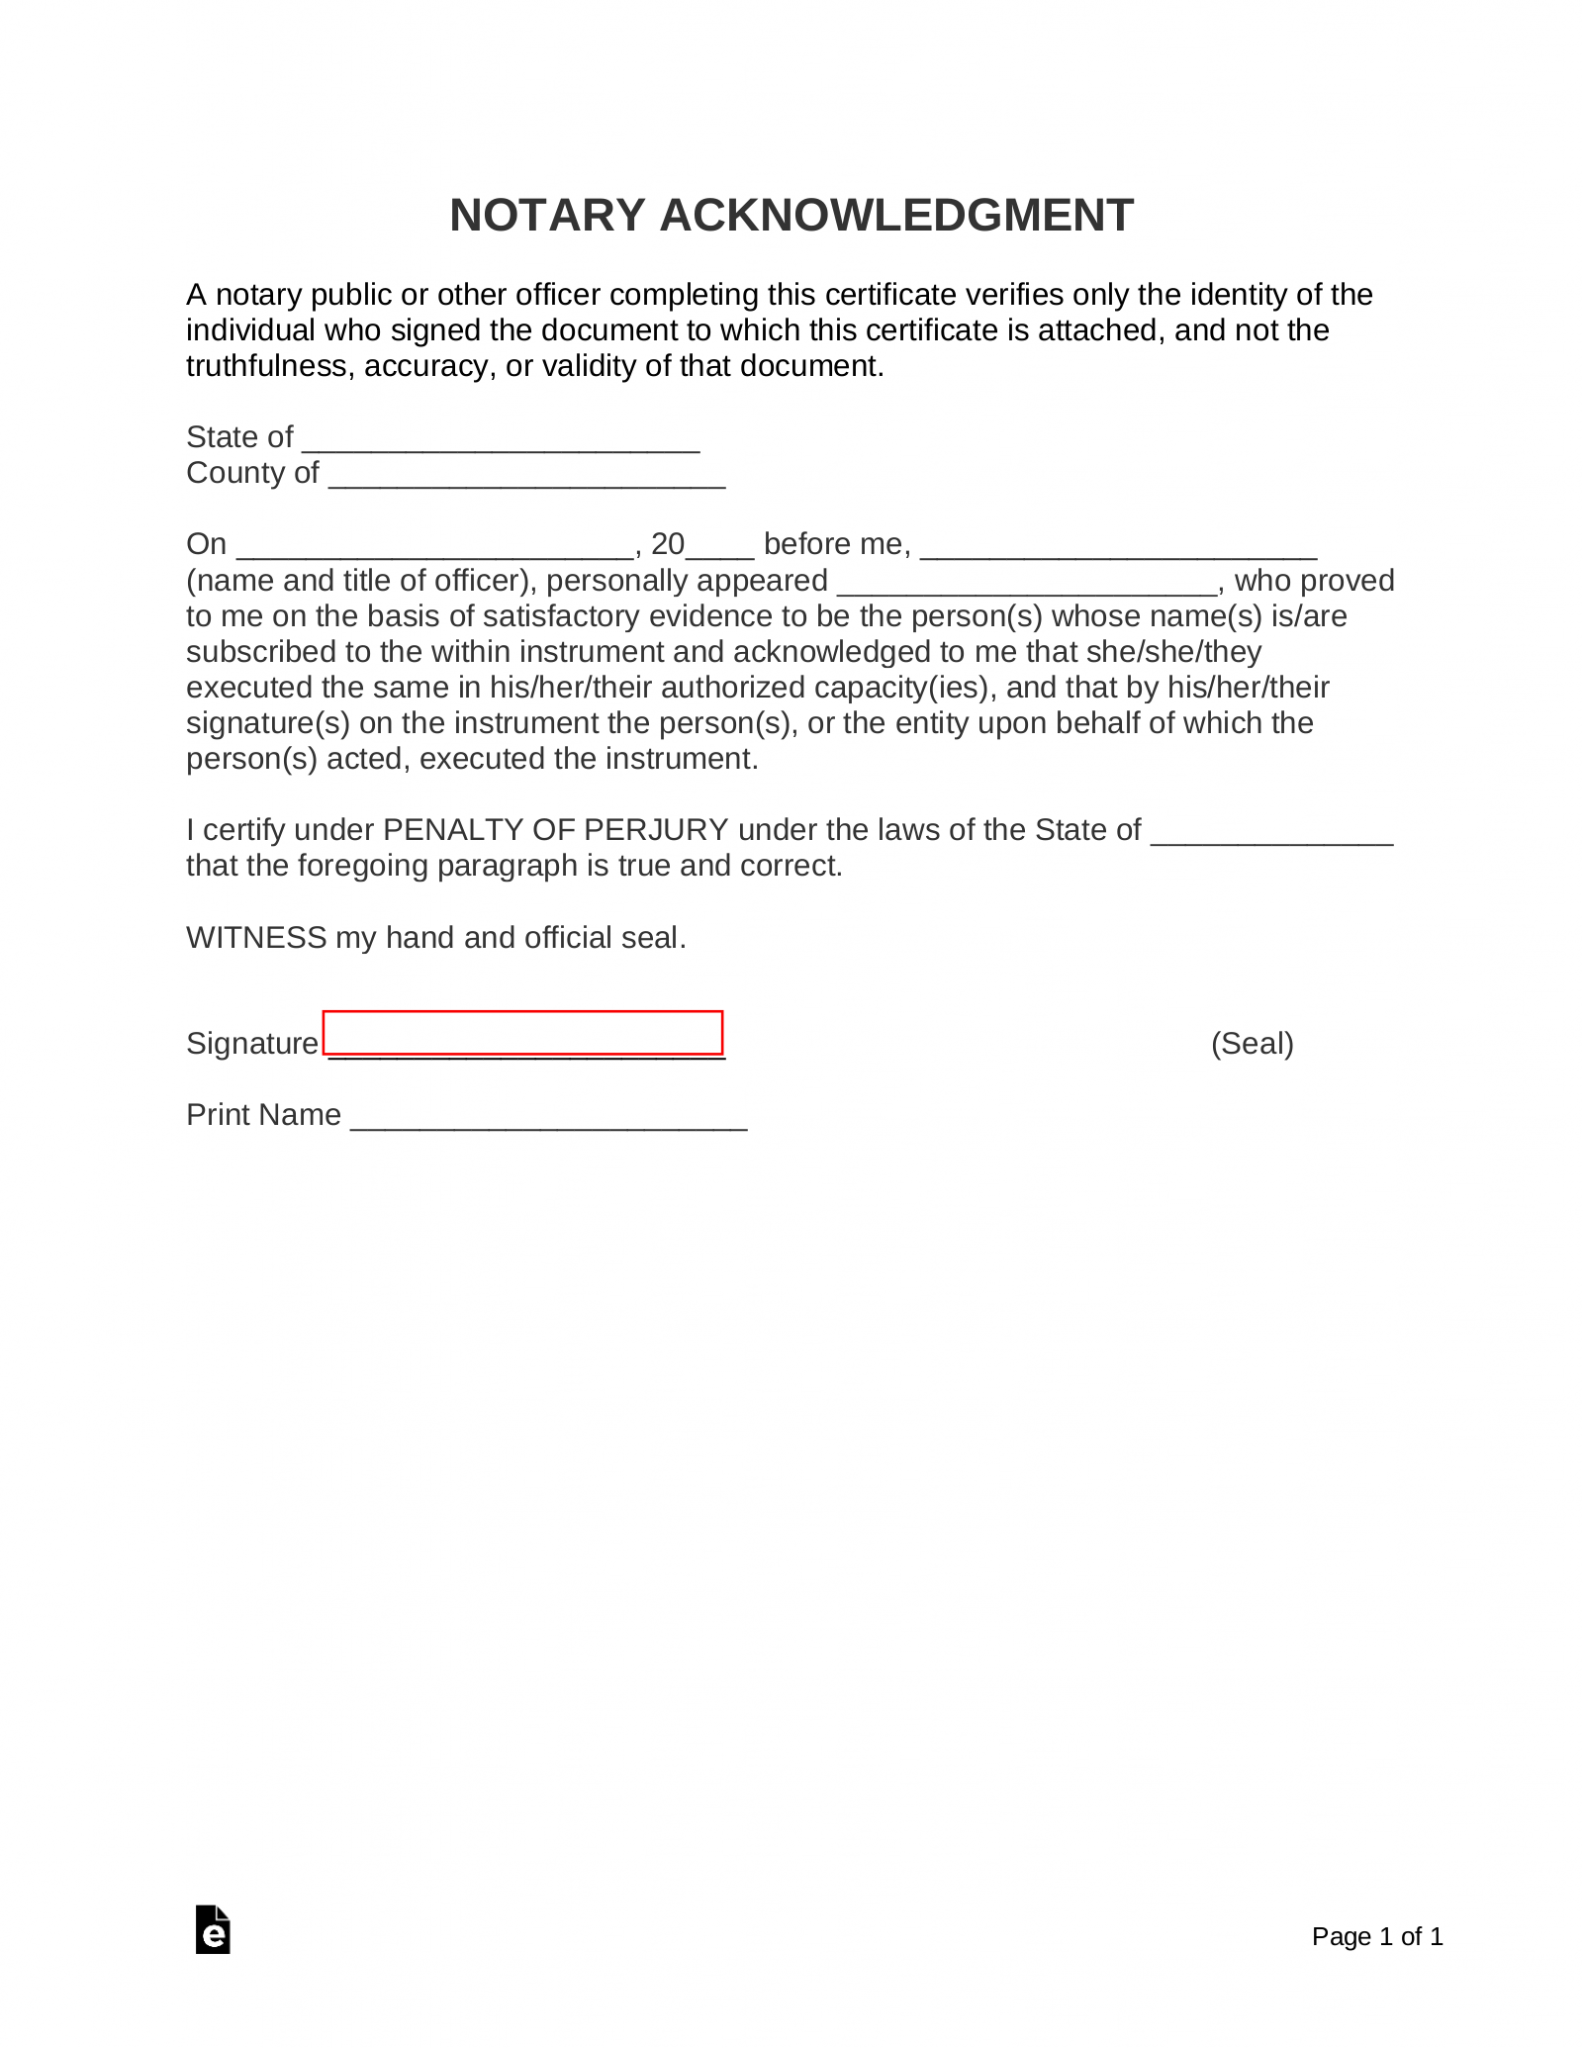 free-notary-acknowledgment-forms-pdf-word-eforms